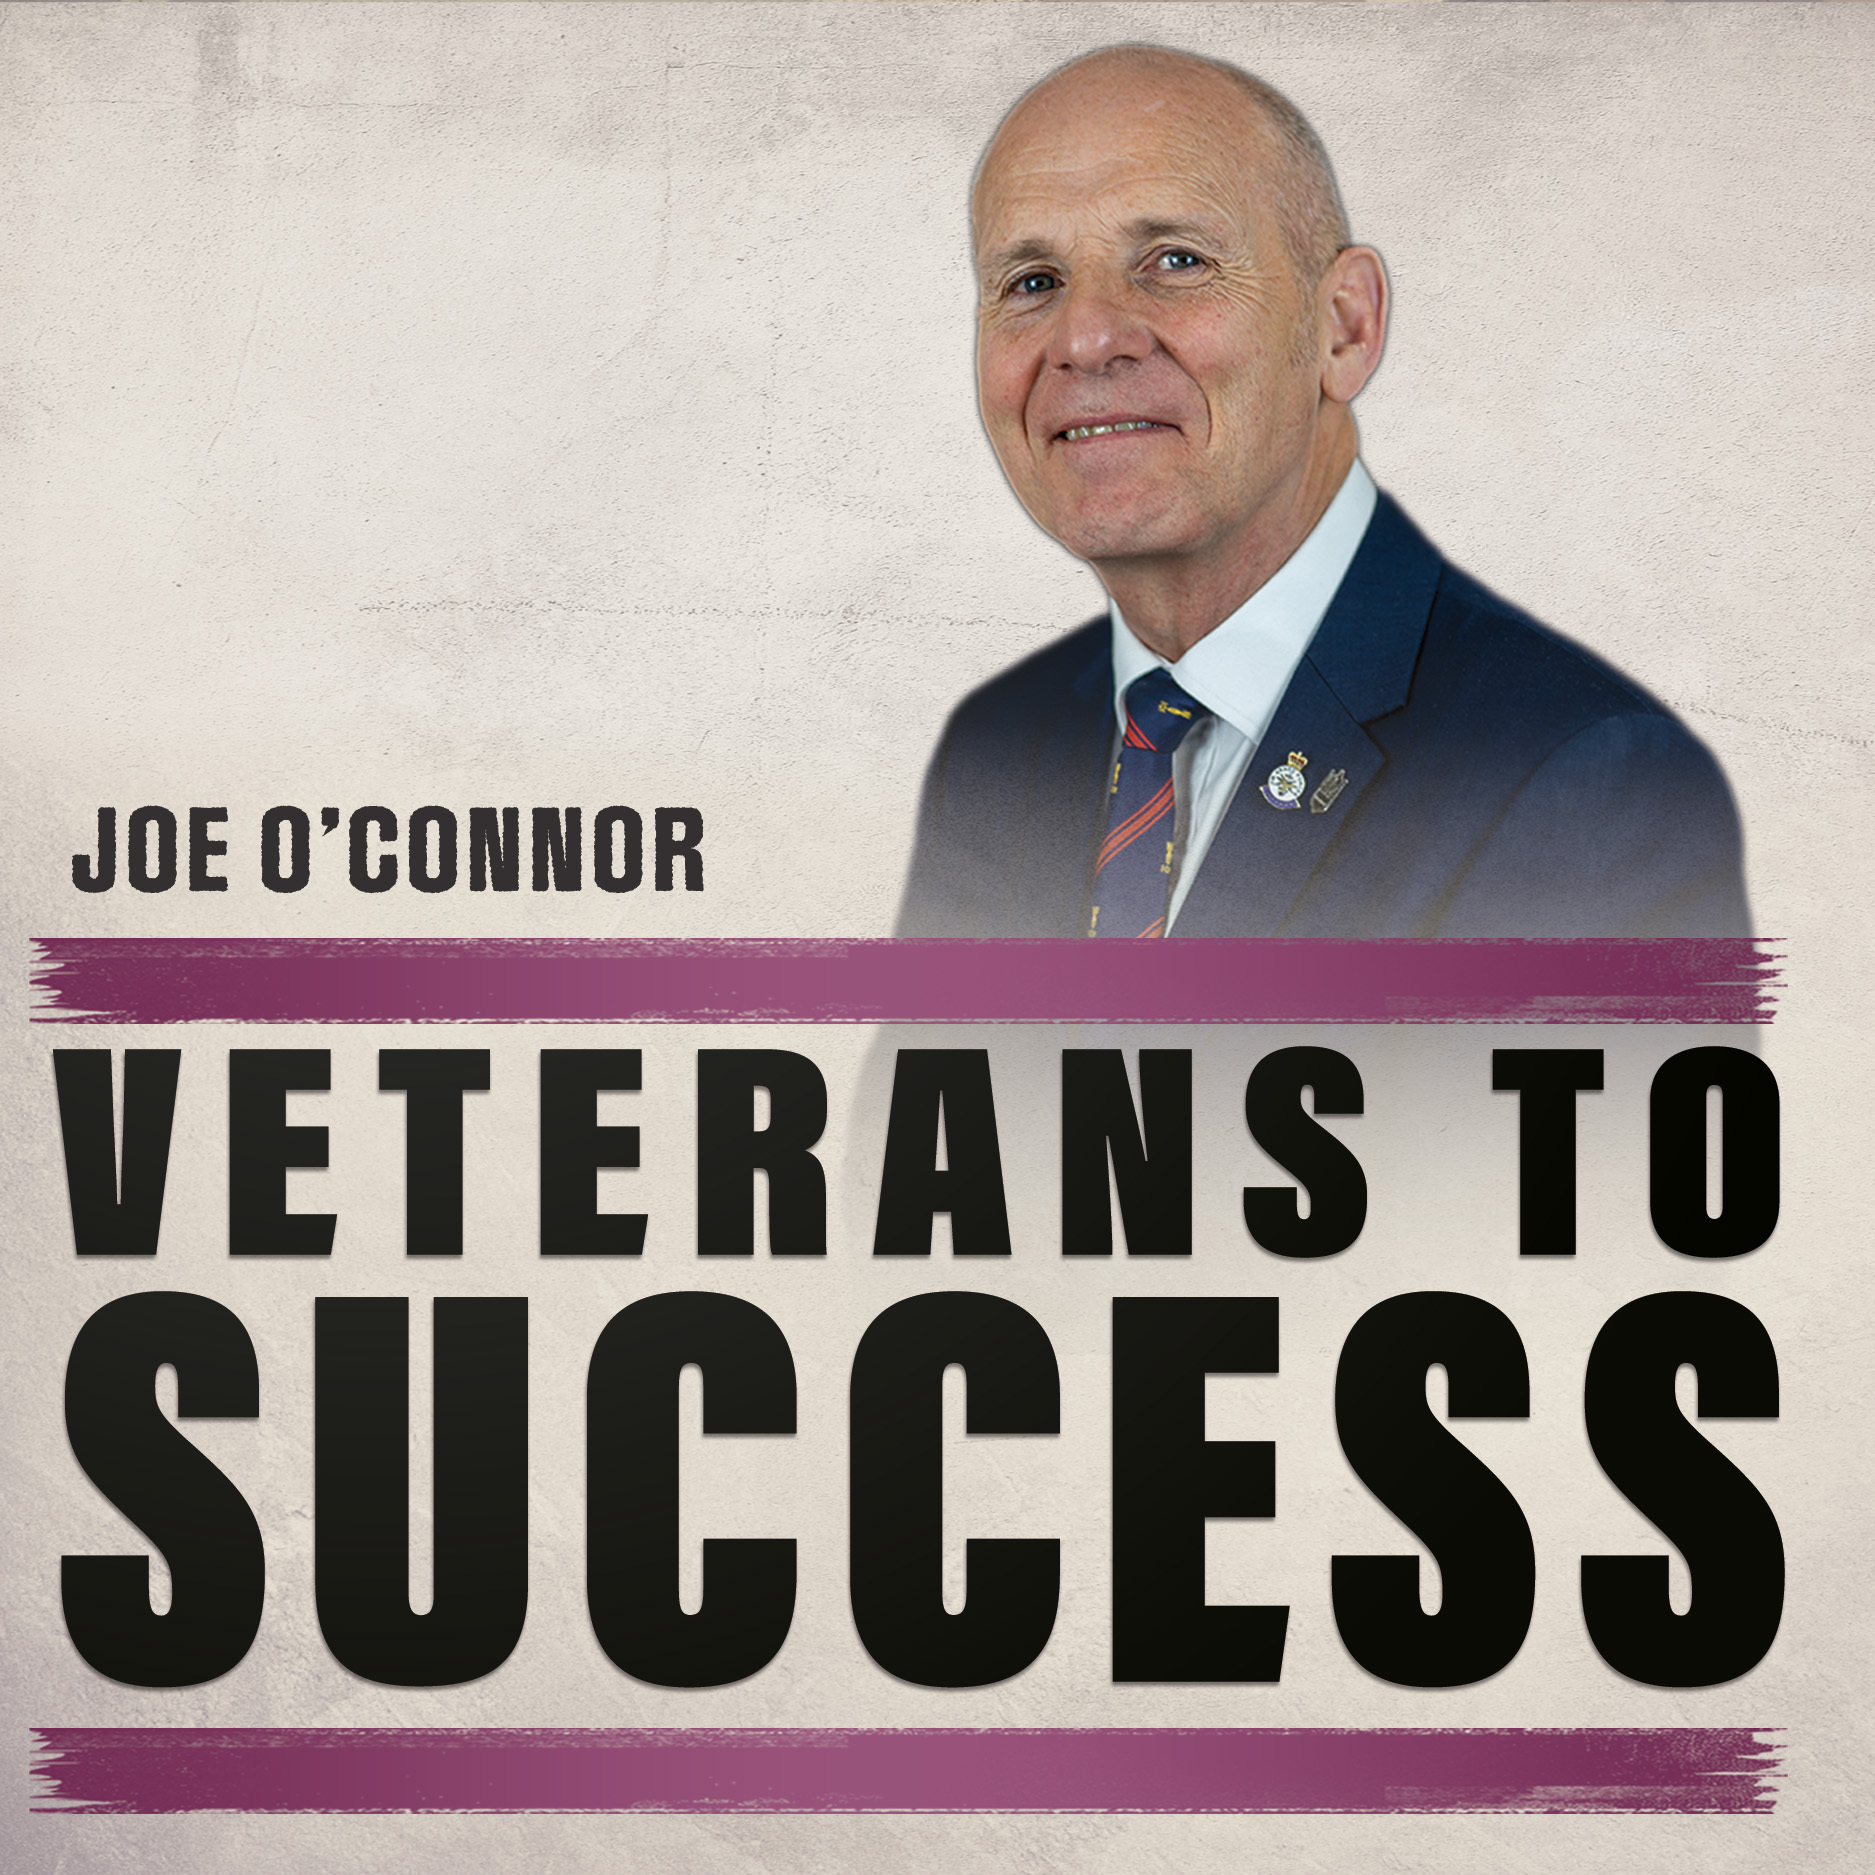 From Troubled Youth to Military Success: A Veteran's Inspiring Journey